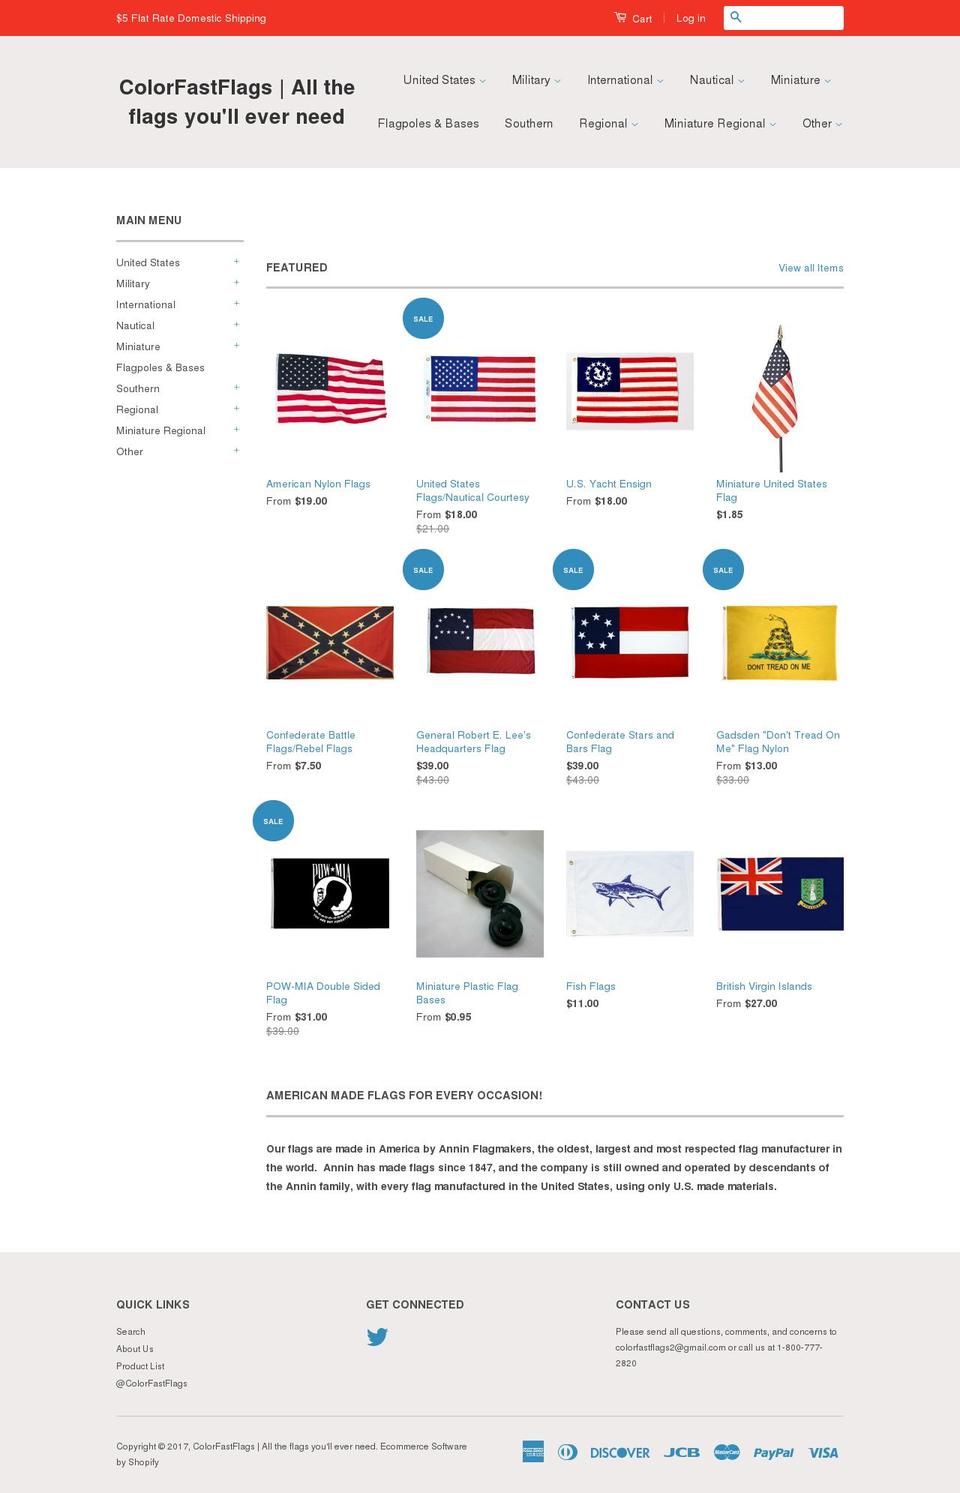 classic Shopify theme site example colorfastflags.com